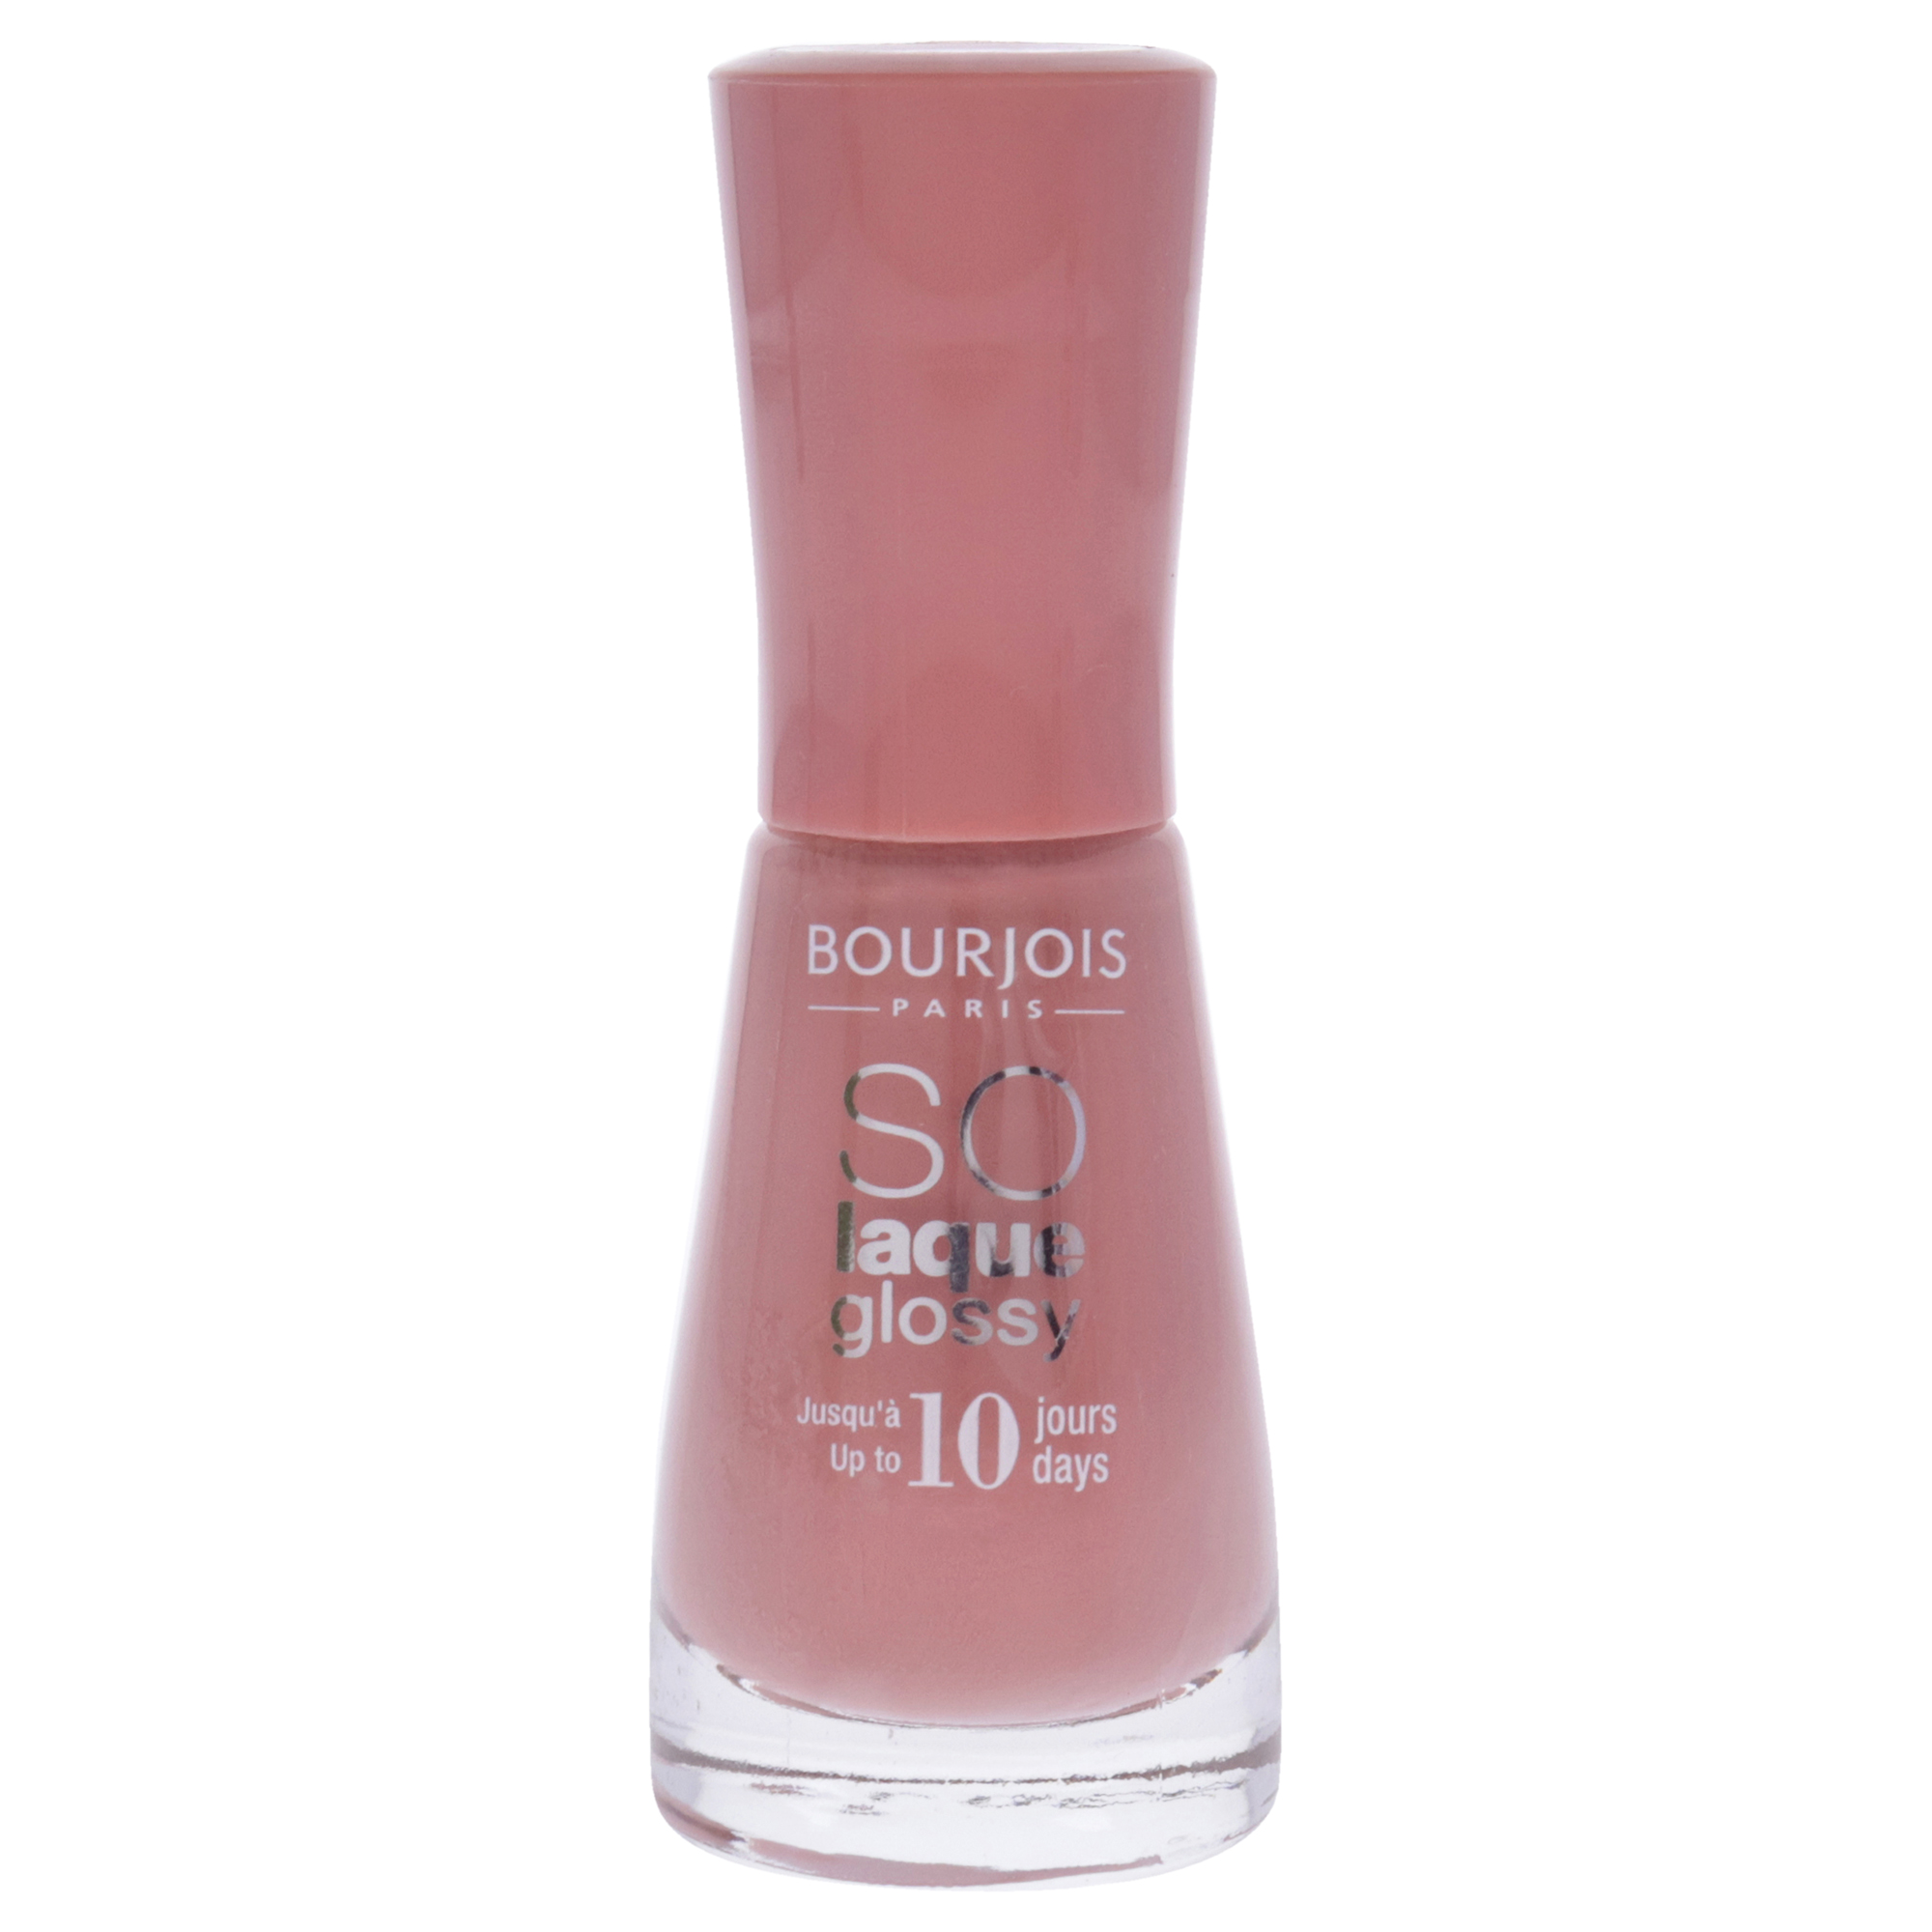 Bourjois So Laque Glossy - # 13 Tombee A Pink by Bourjois for Women - 0.3 oz Nail Polish